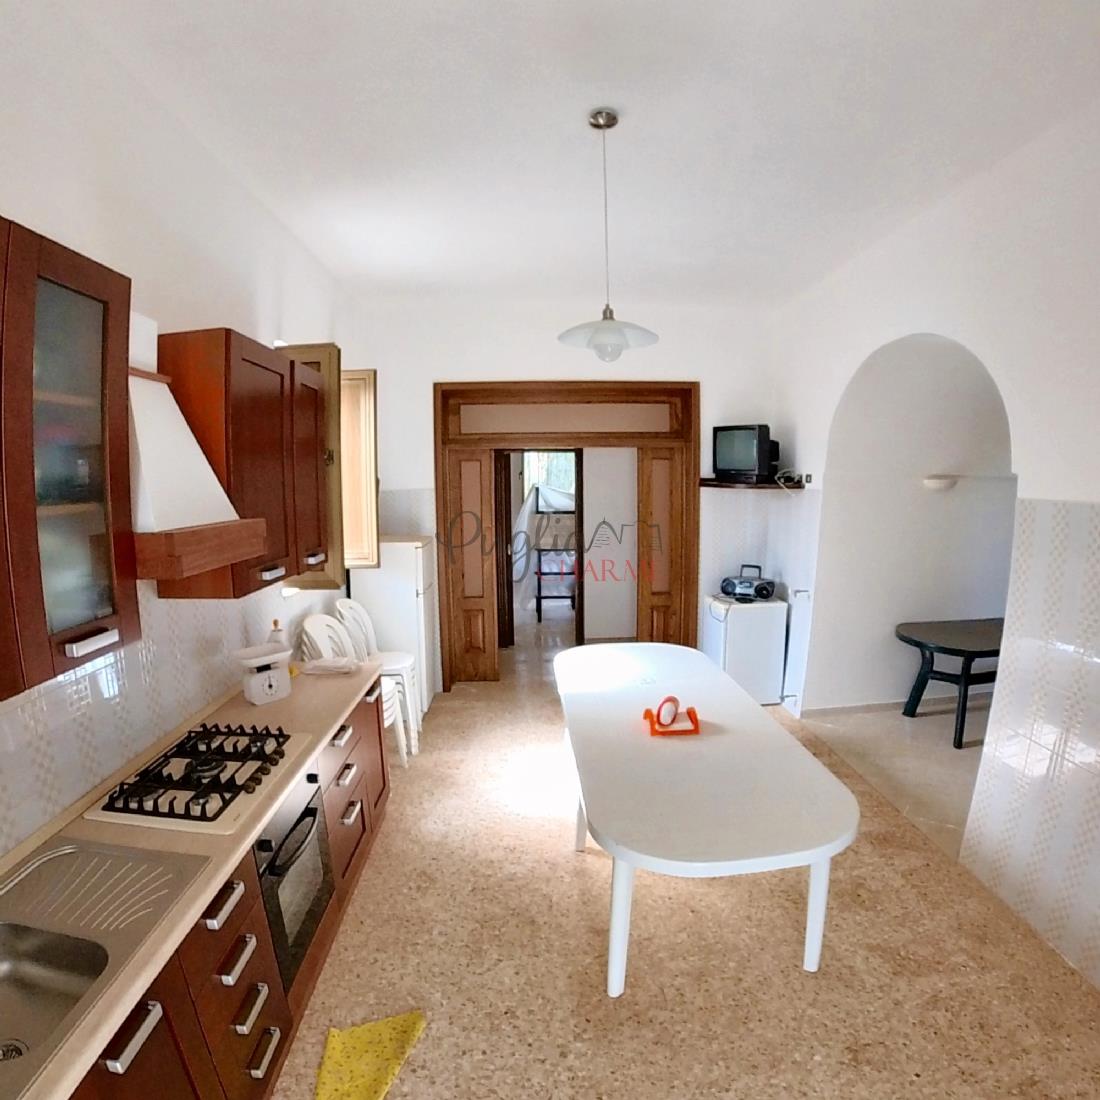 Detached villa for sale in a residential area